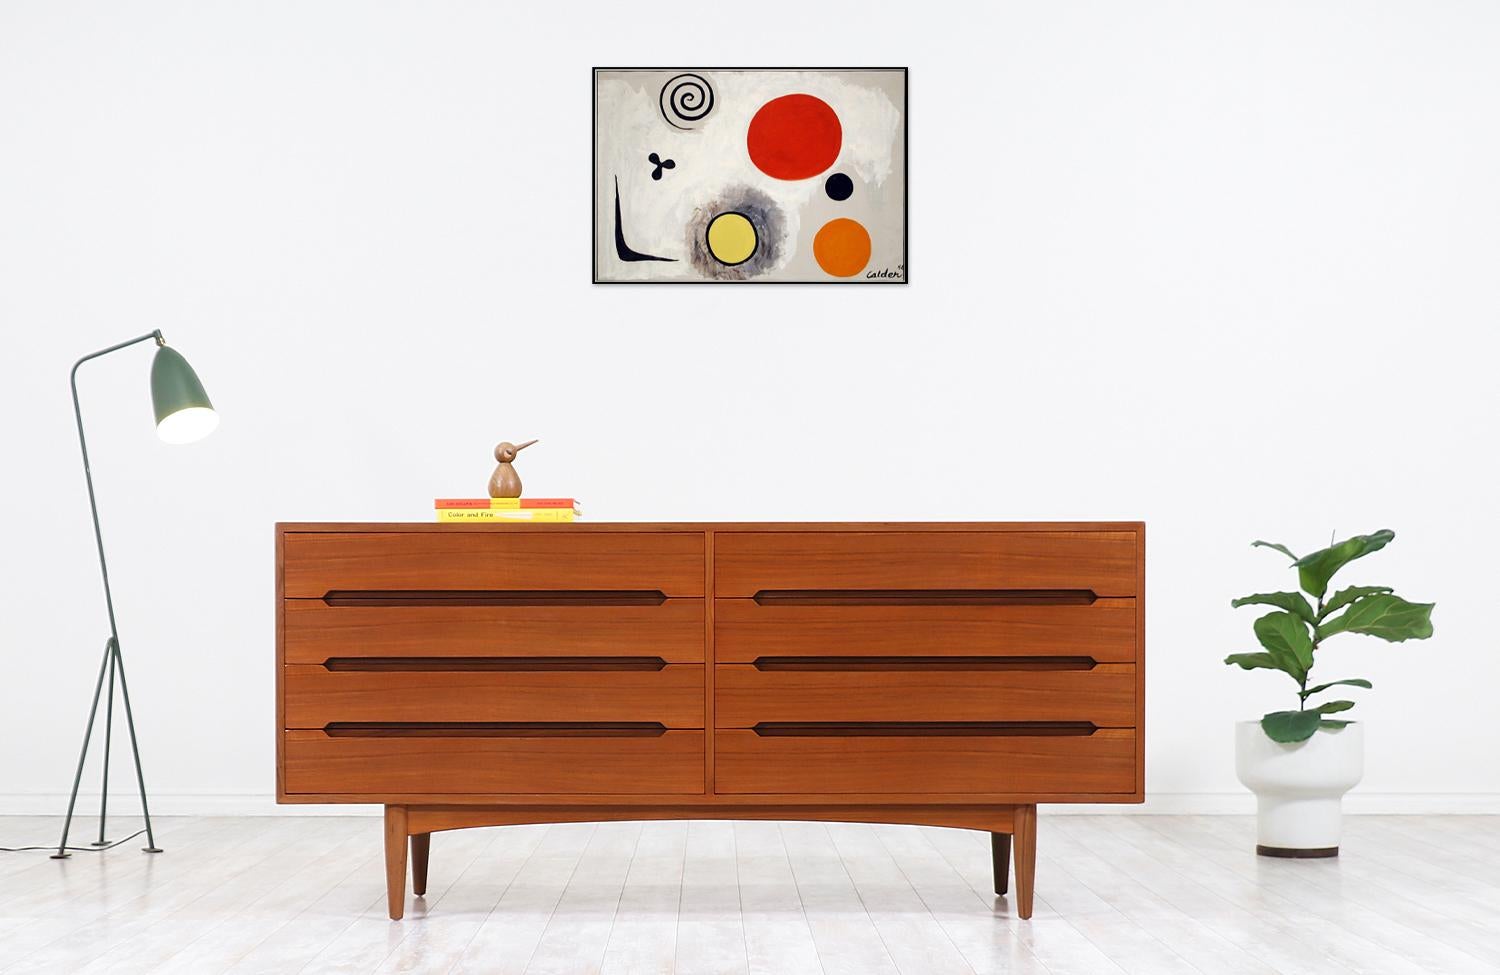 Elegant modern dresser designed and manufactured by E.W. Bach in Denmark circa 1950s. This Danish Modern teak dresser features eight drawers with dovetailed joinery and carved pulls showcasing impeccable craftsmanship, bringing a beautiful